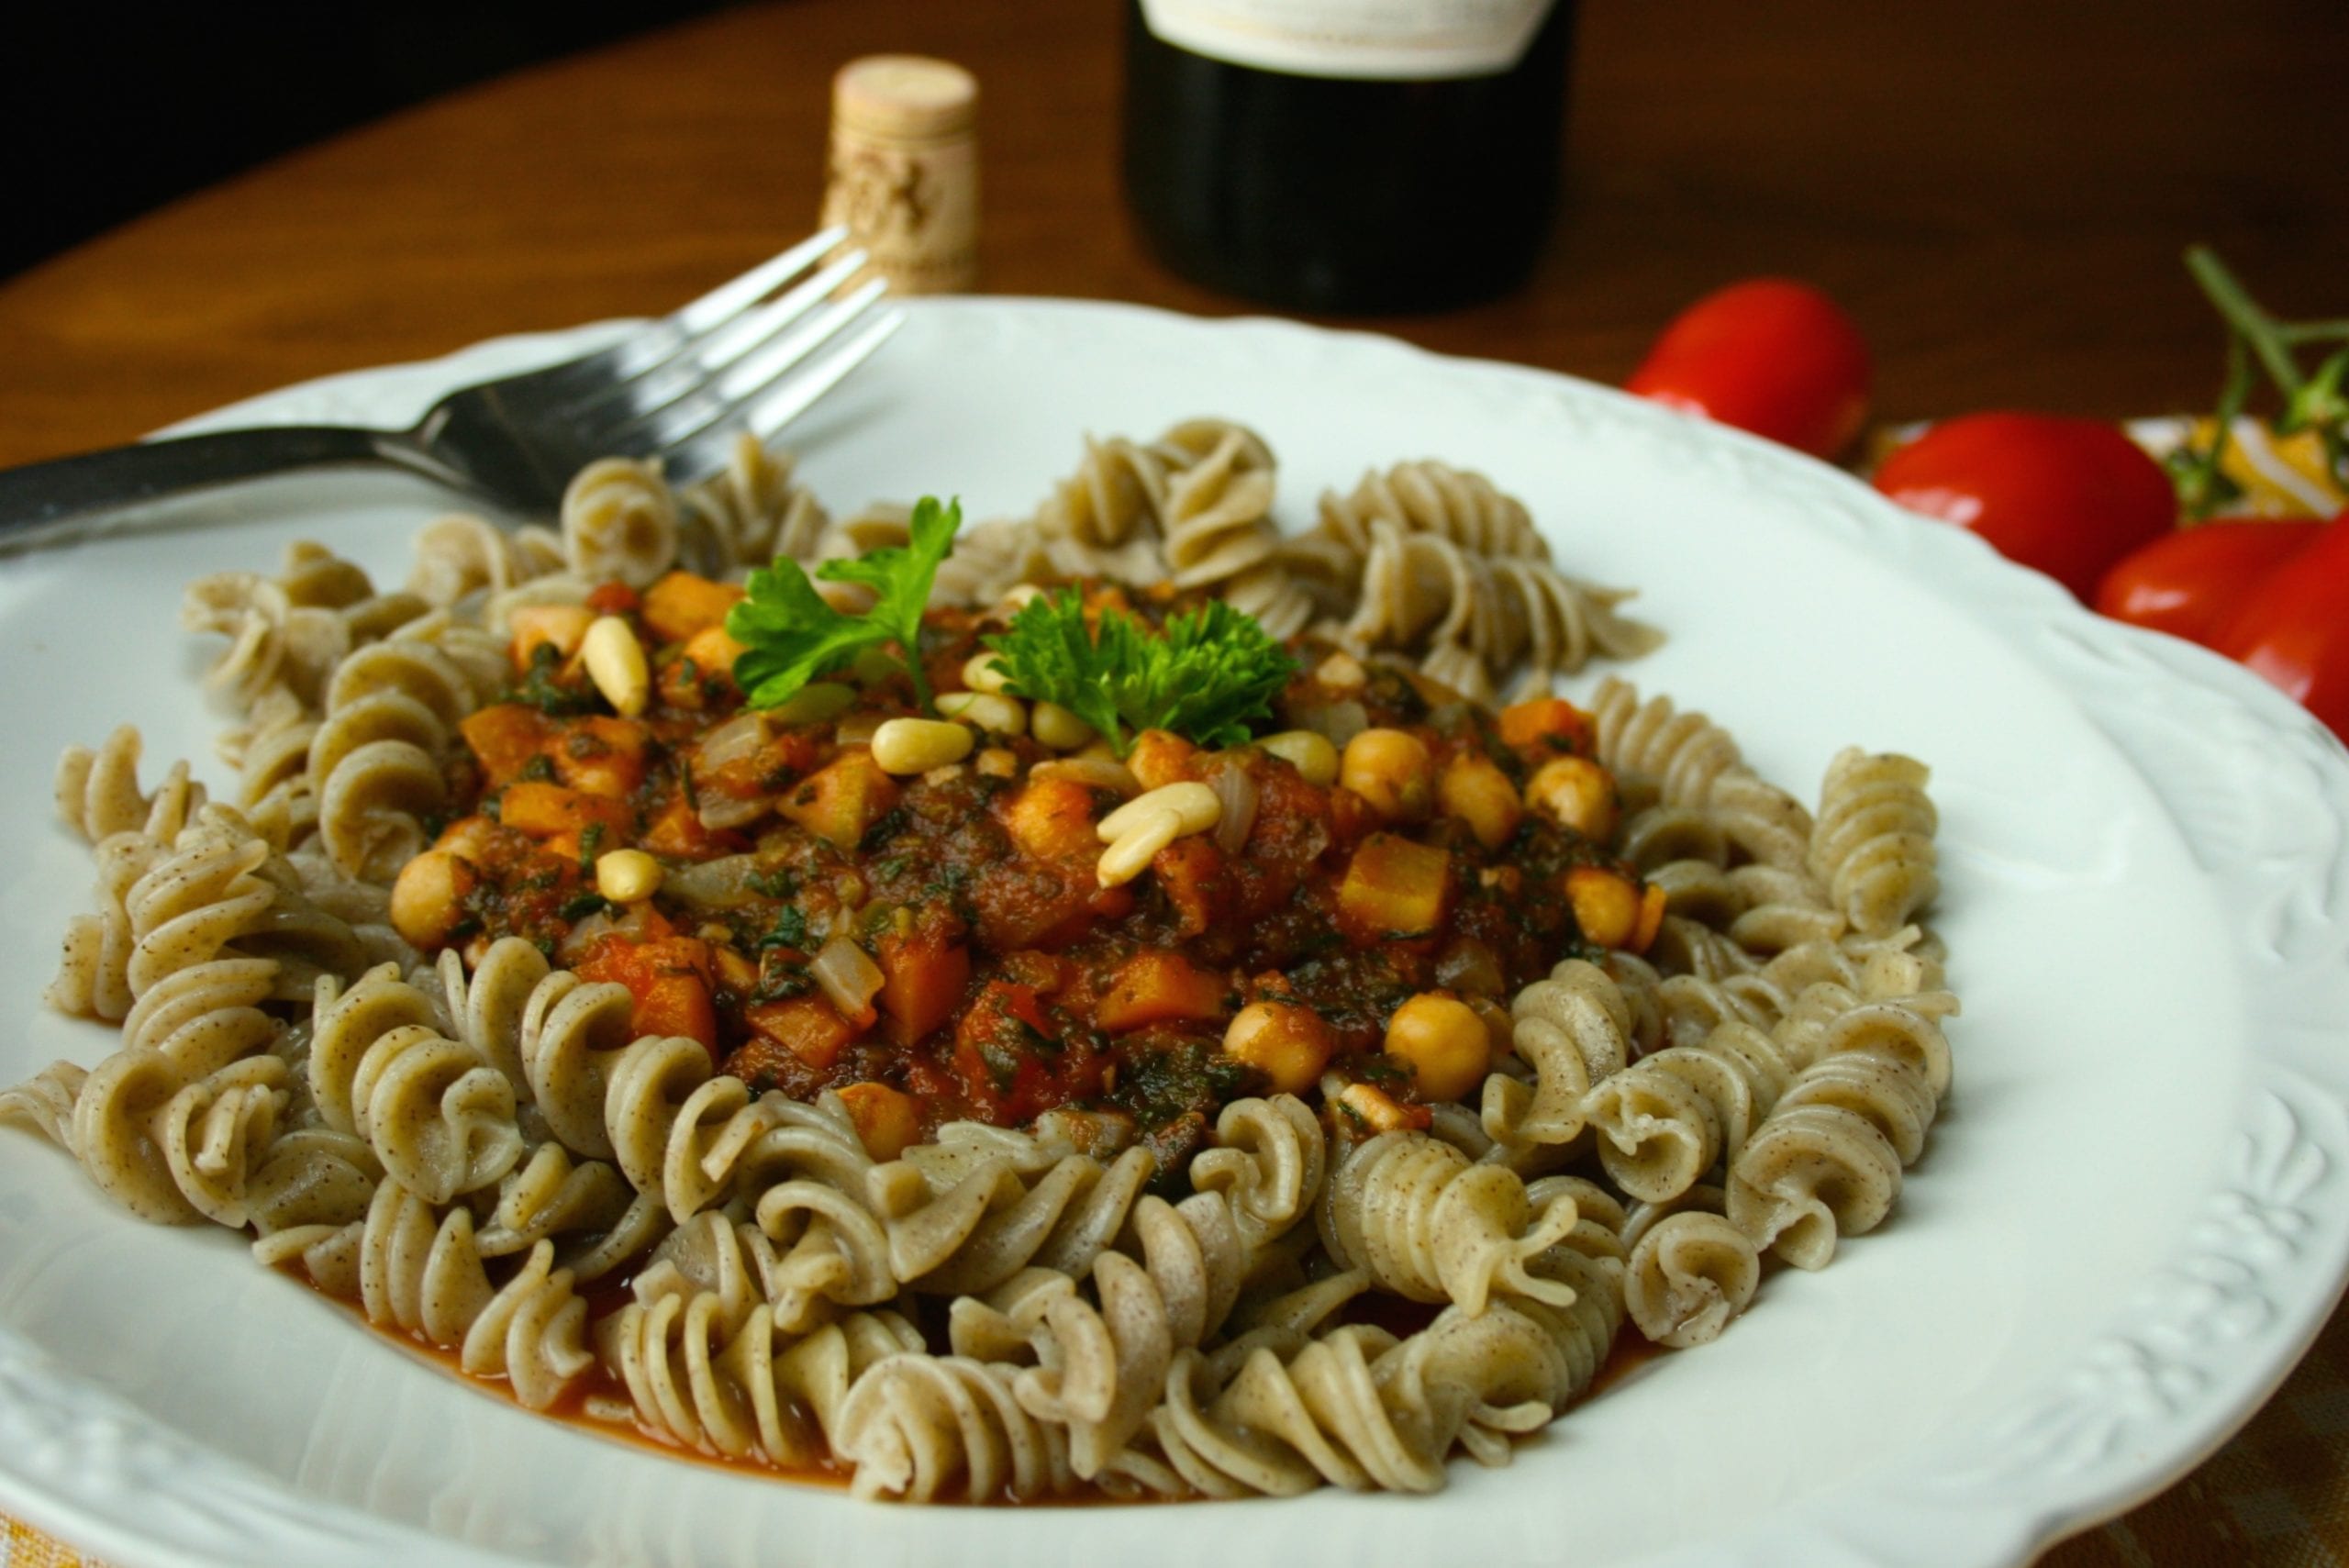 Spinach Tomato Pasta with Chickpeas